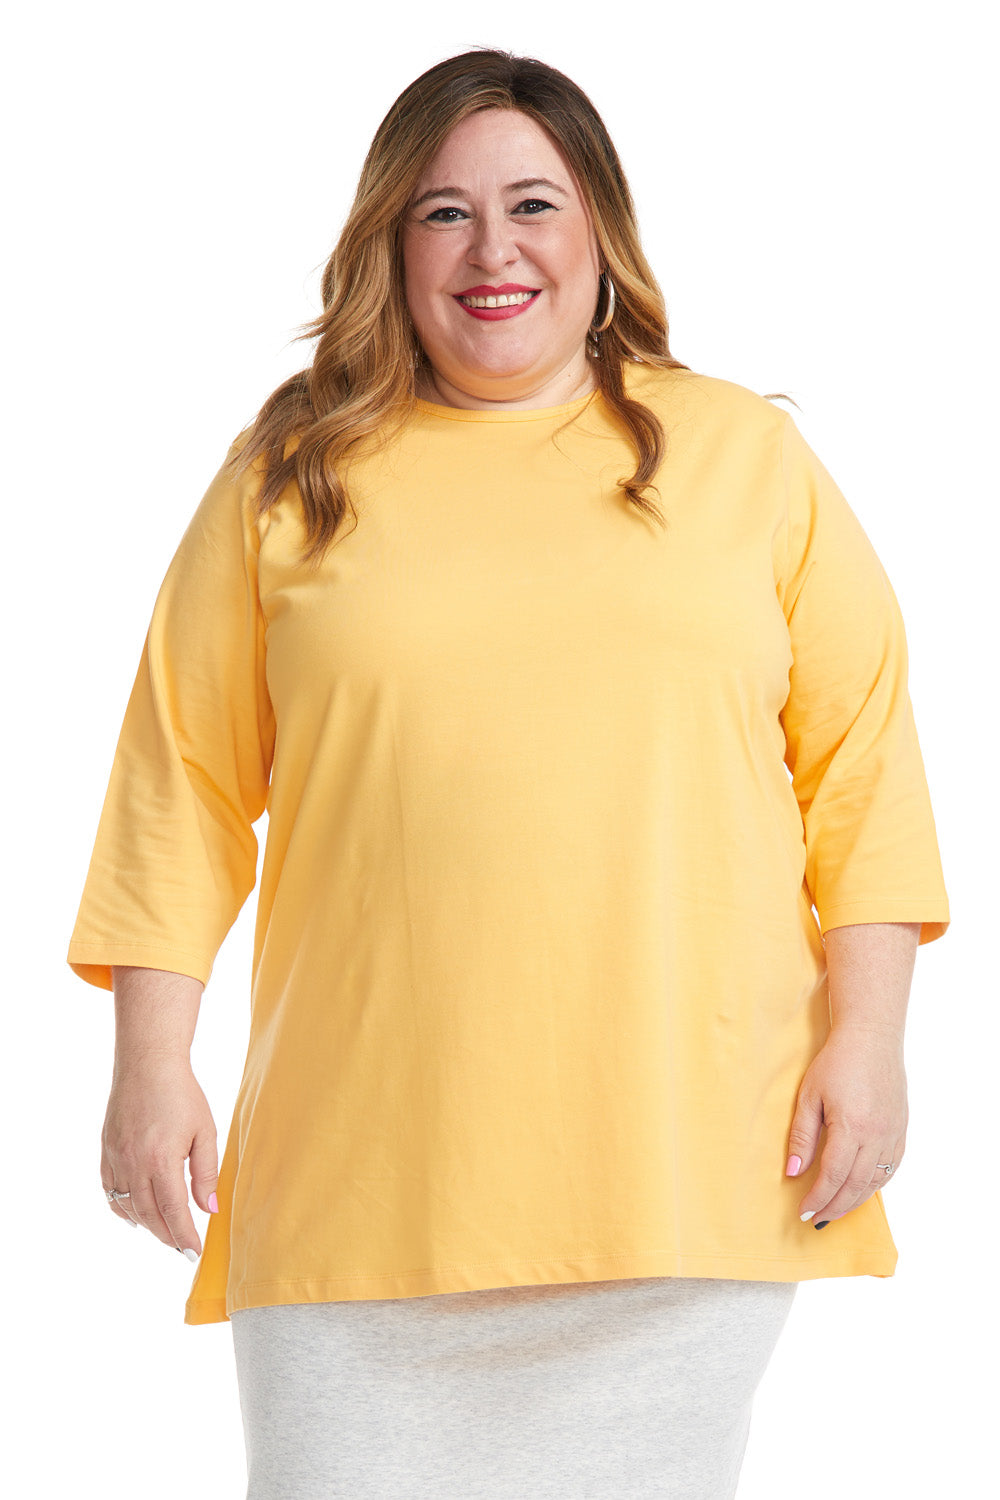 Yellow oversized loose comfortable tee for plus size women